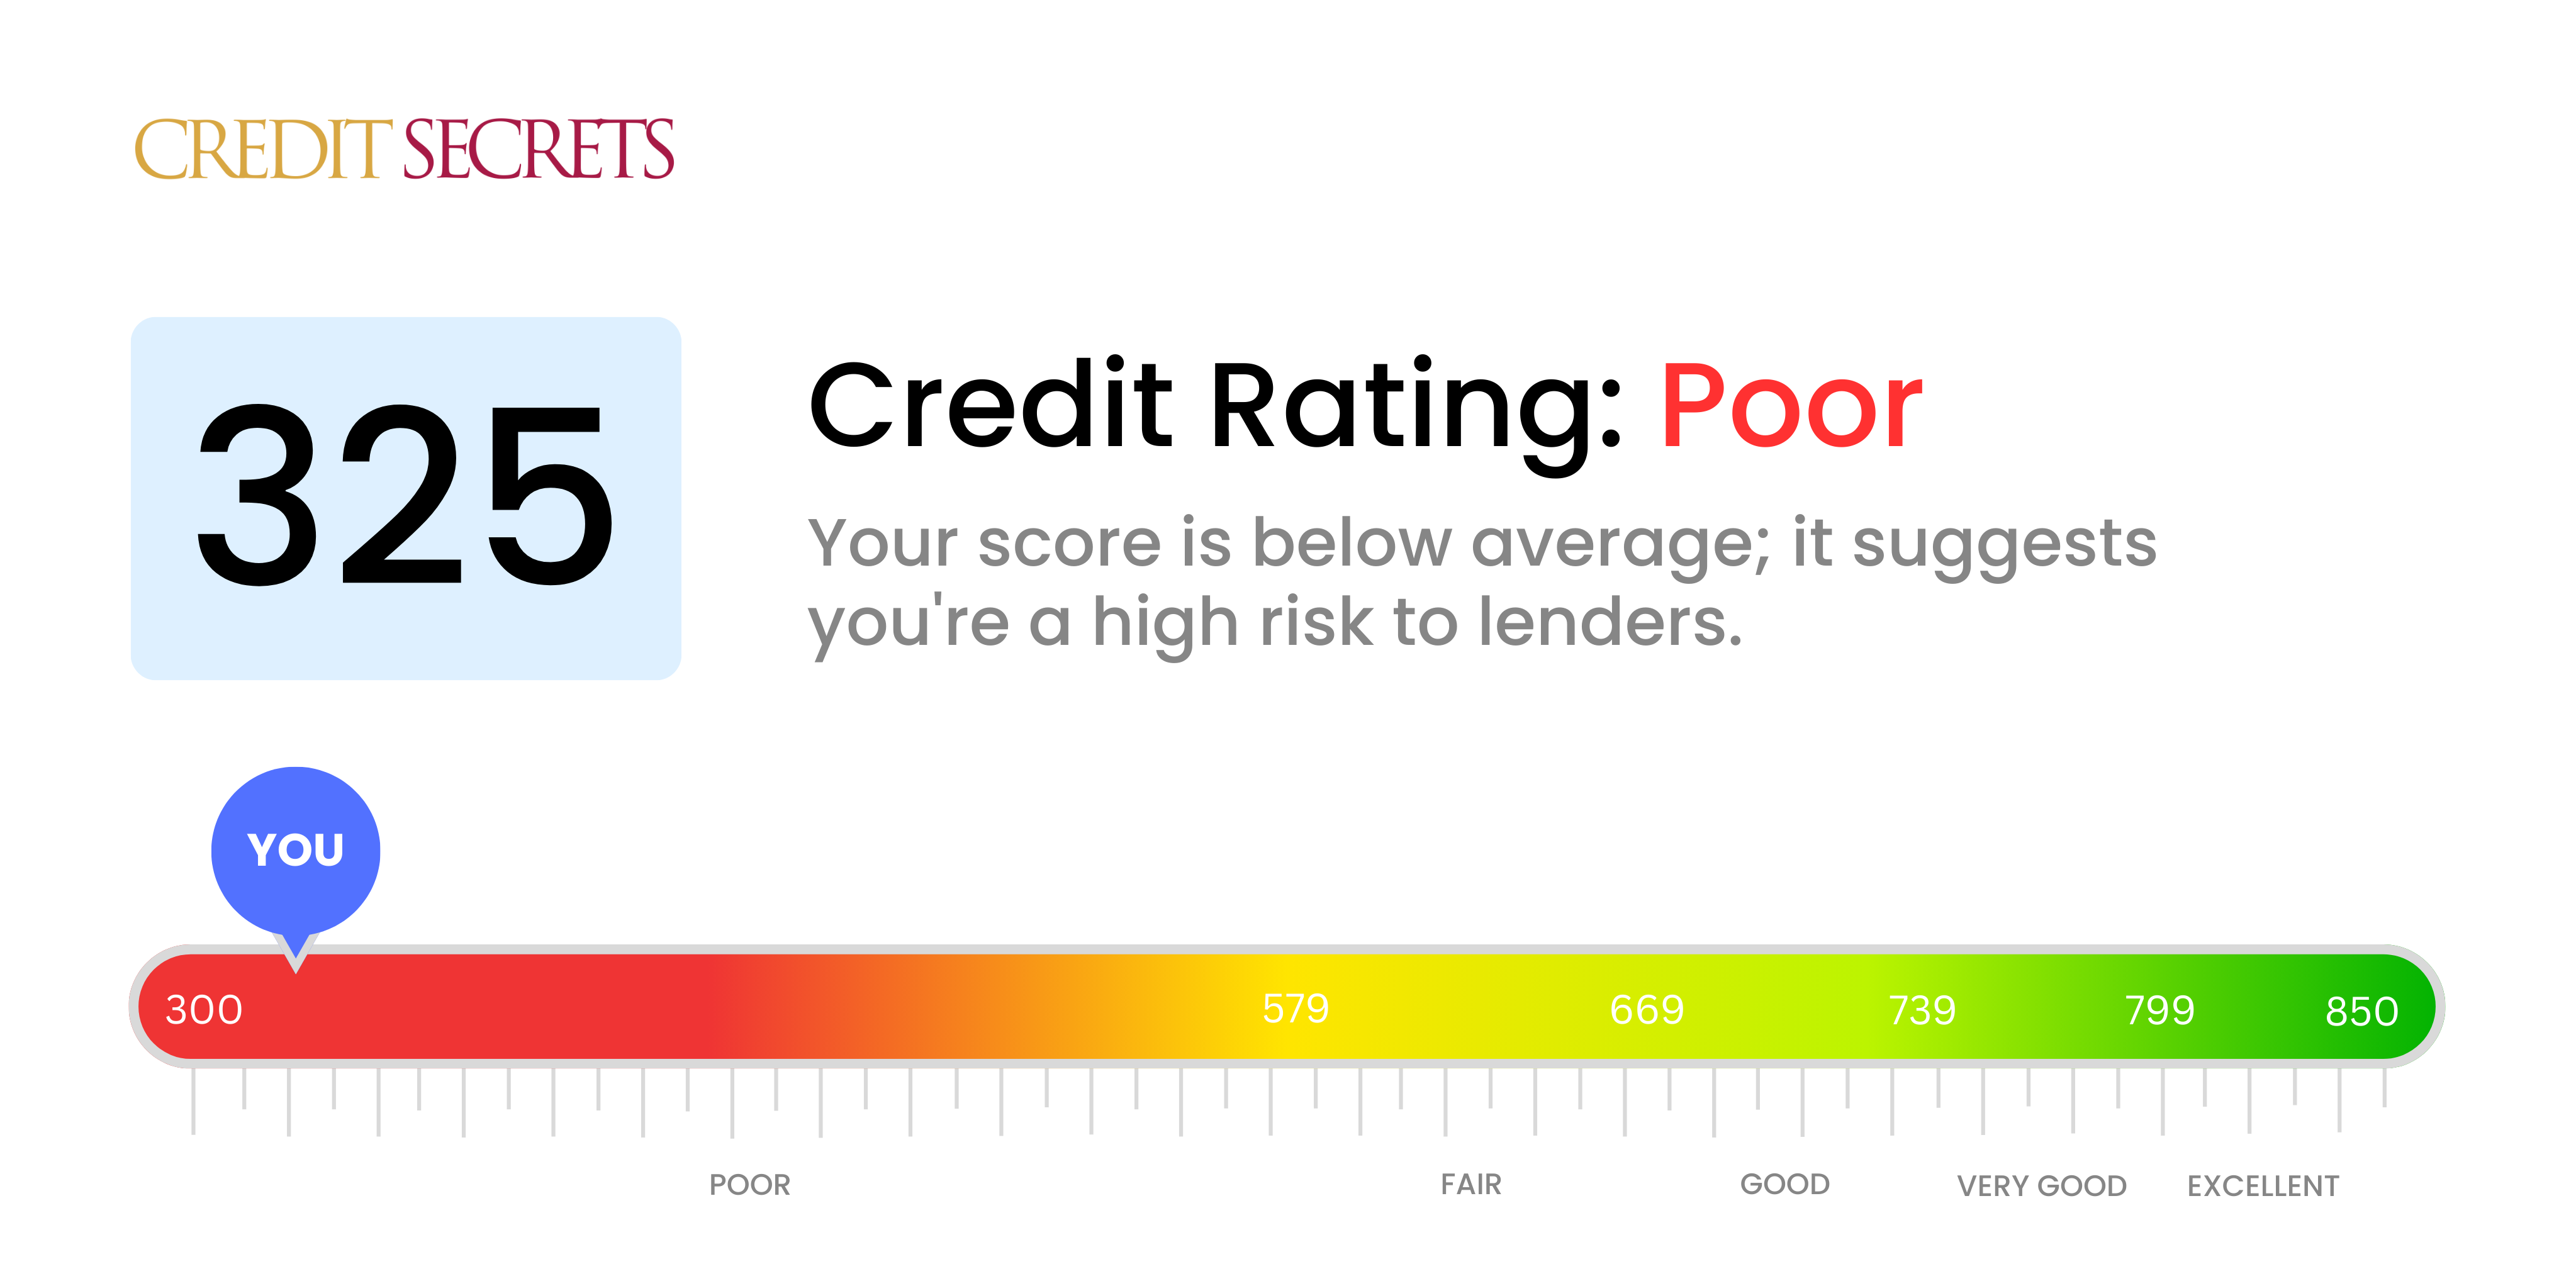 Is 325 a good credit score?